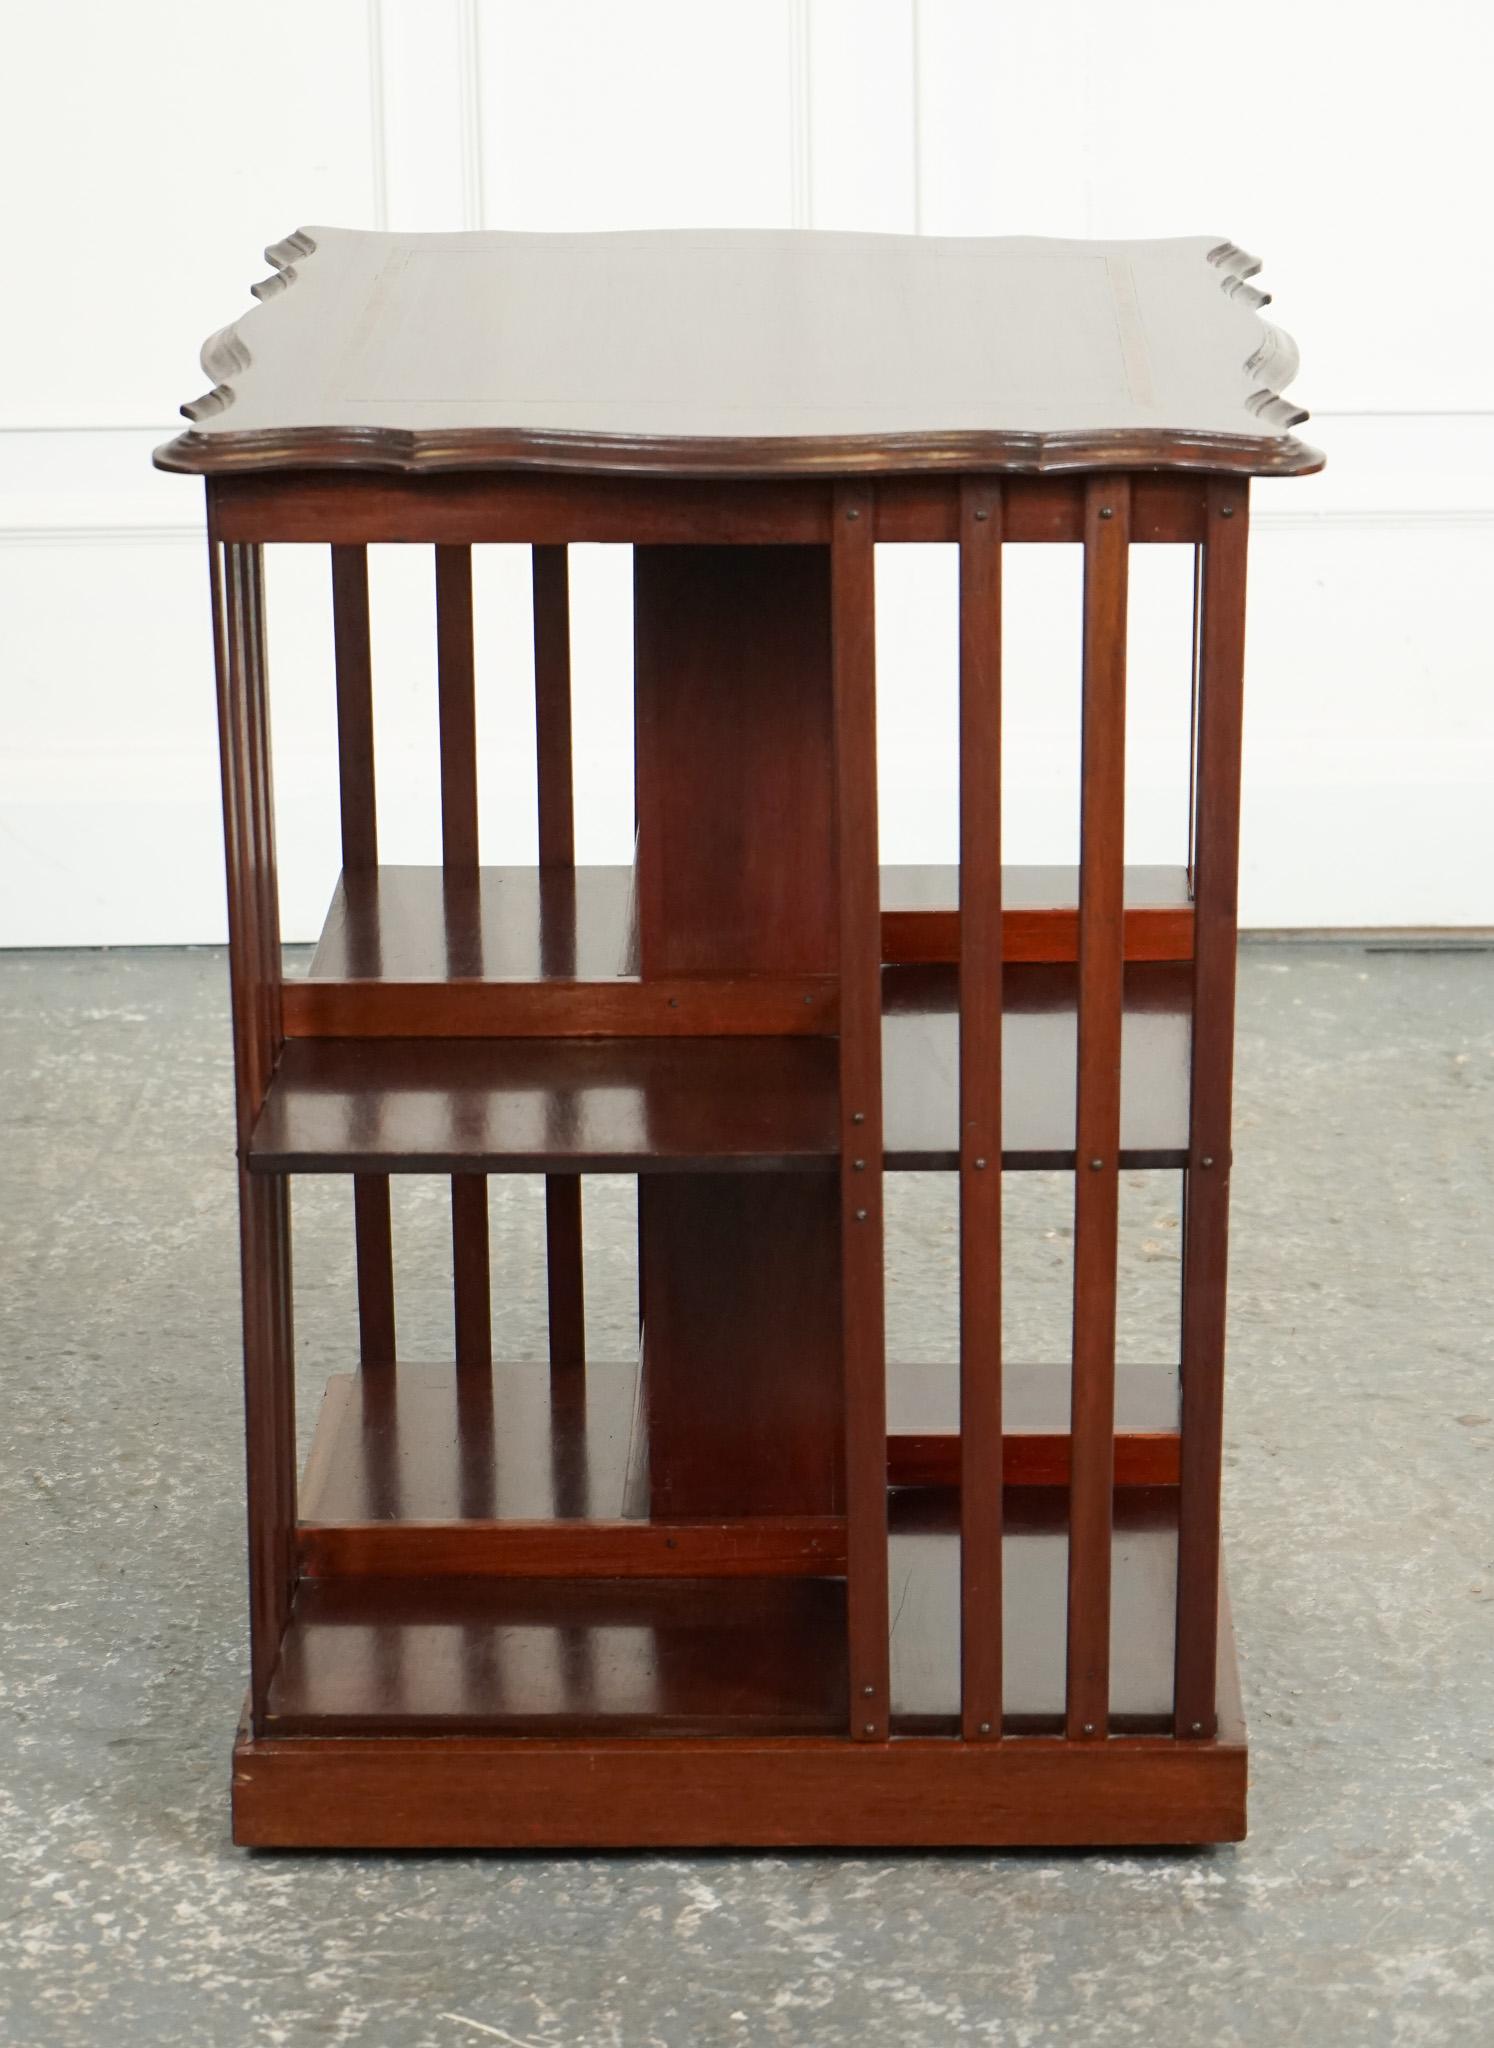 ANTIQUE EDWARDIAN REVOLVING BOOKCASE WITH A SERPENTiNE SHAPED TOP In Good Condition For Sale In Pulborough, GB